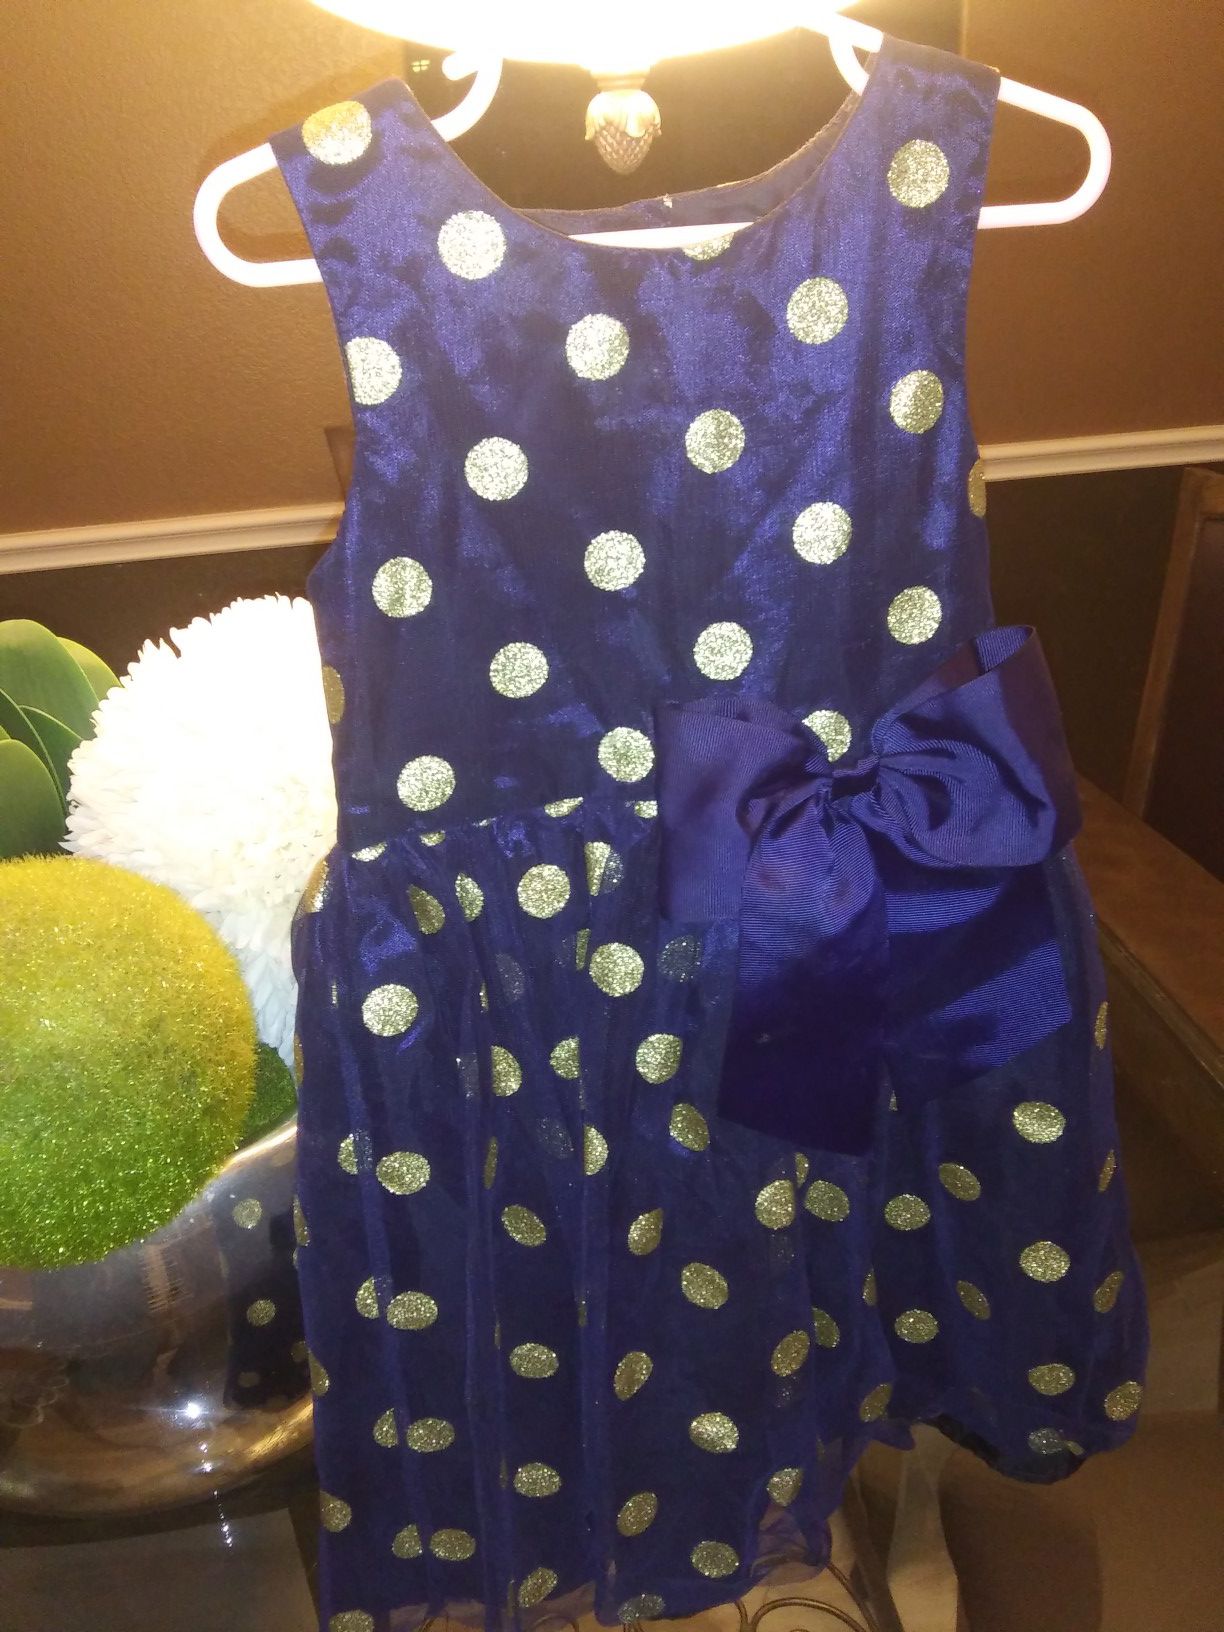 New Price H&M girls dress size 5 -6 yrs. Dark blue with gold dots